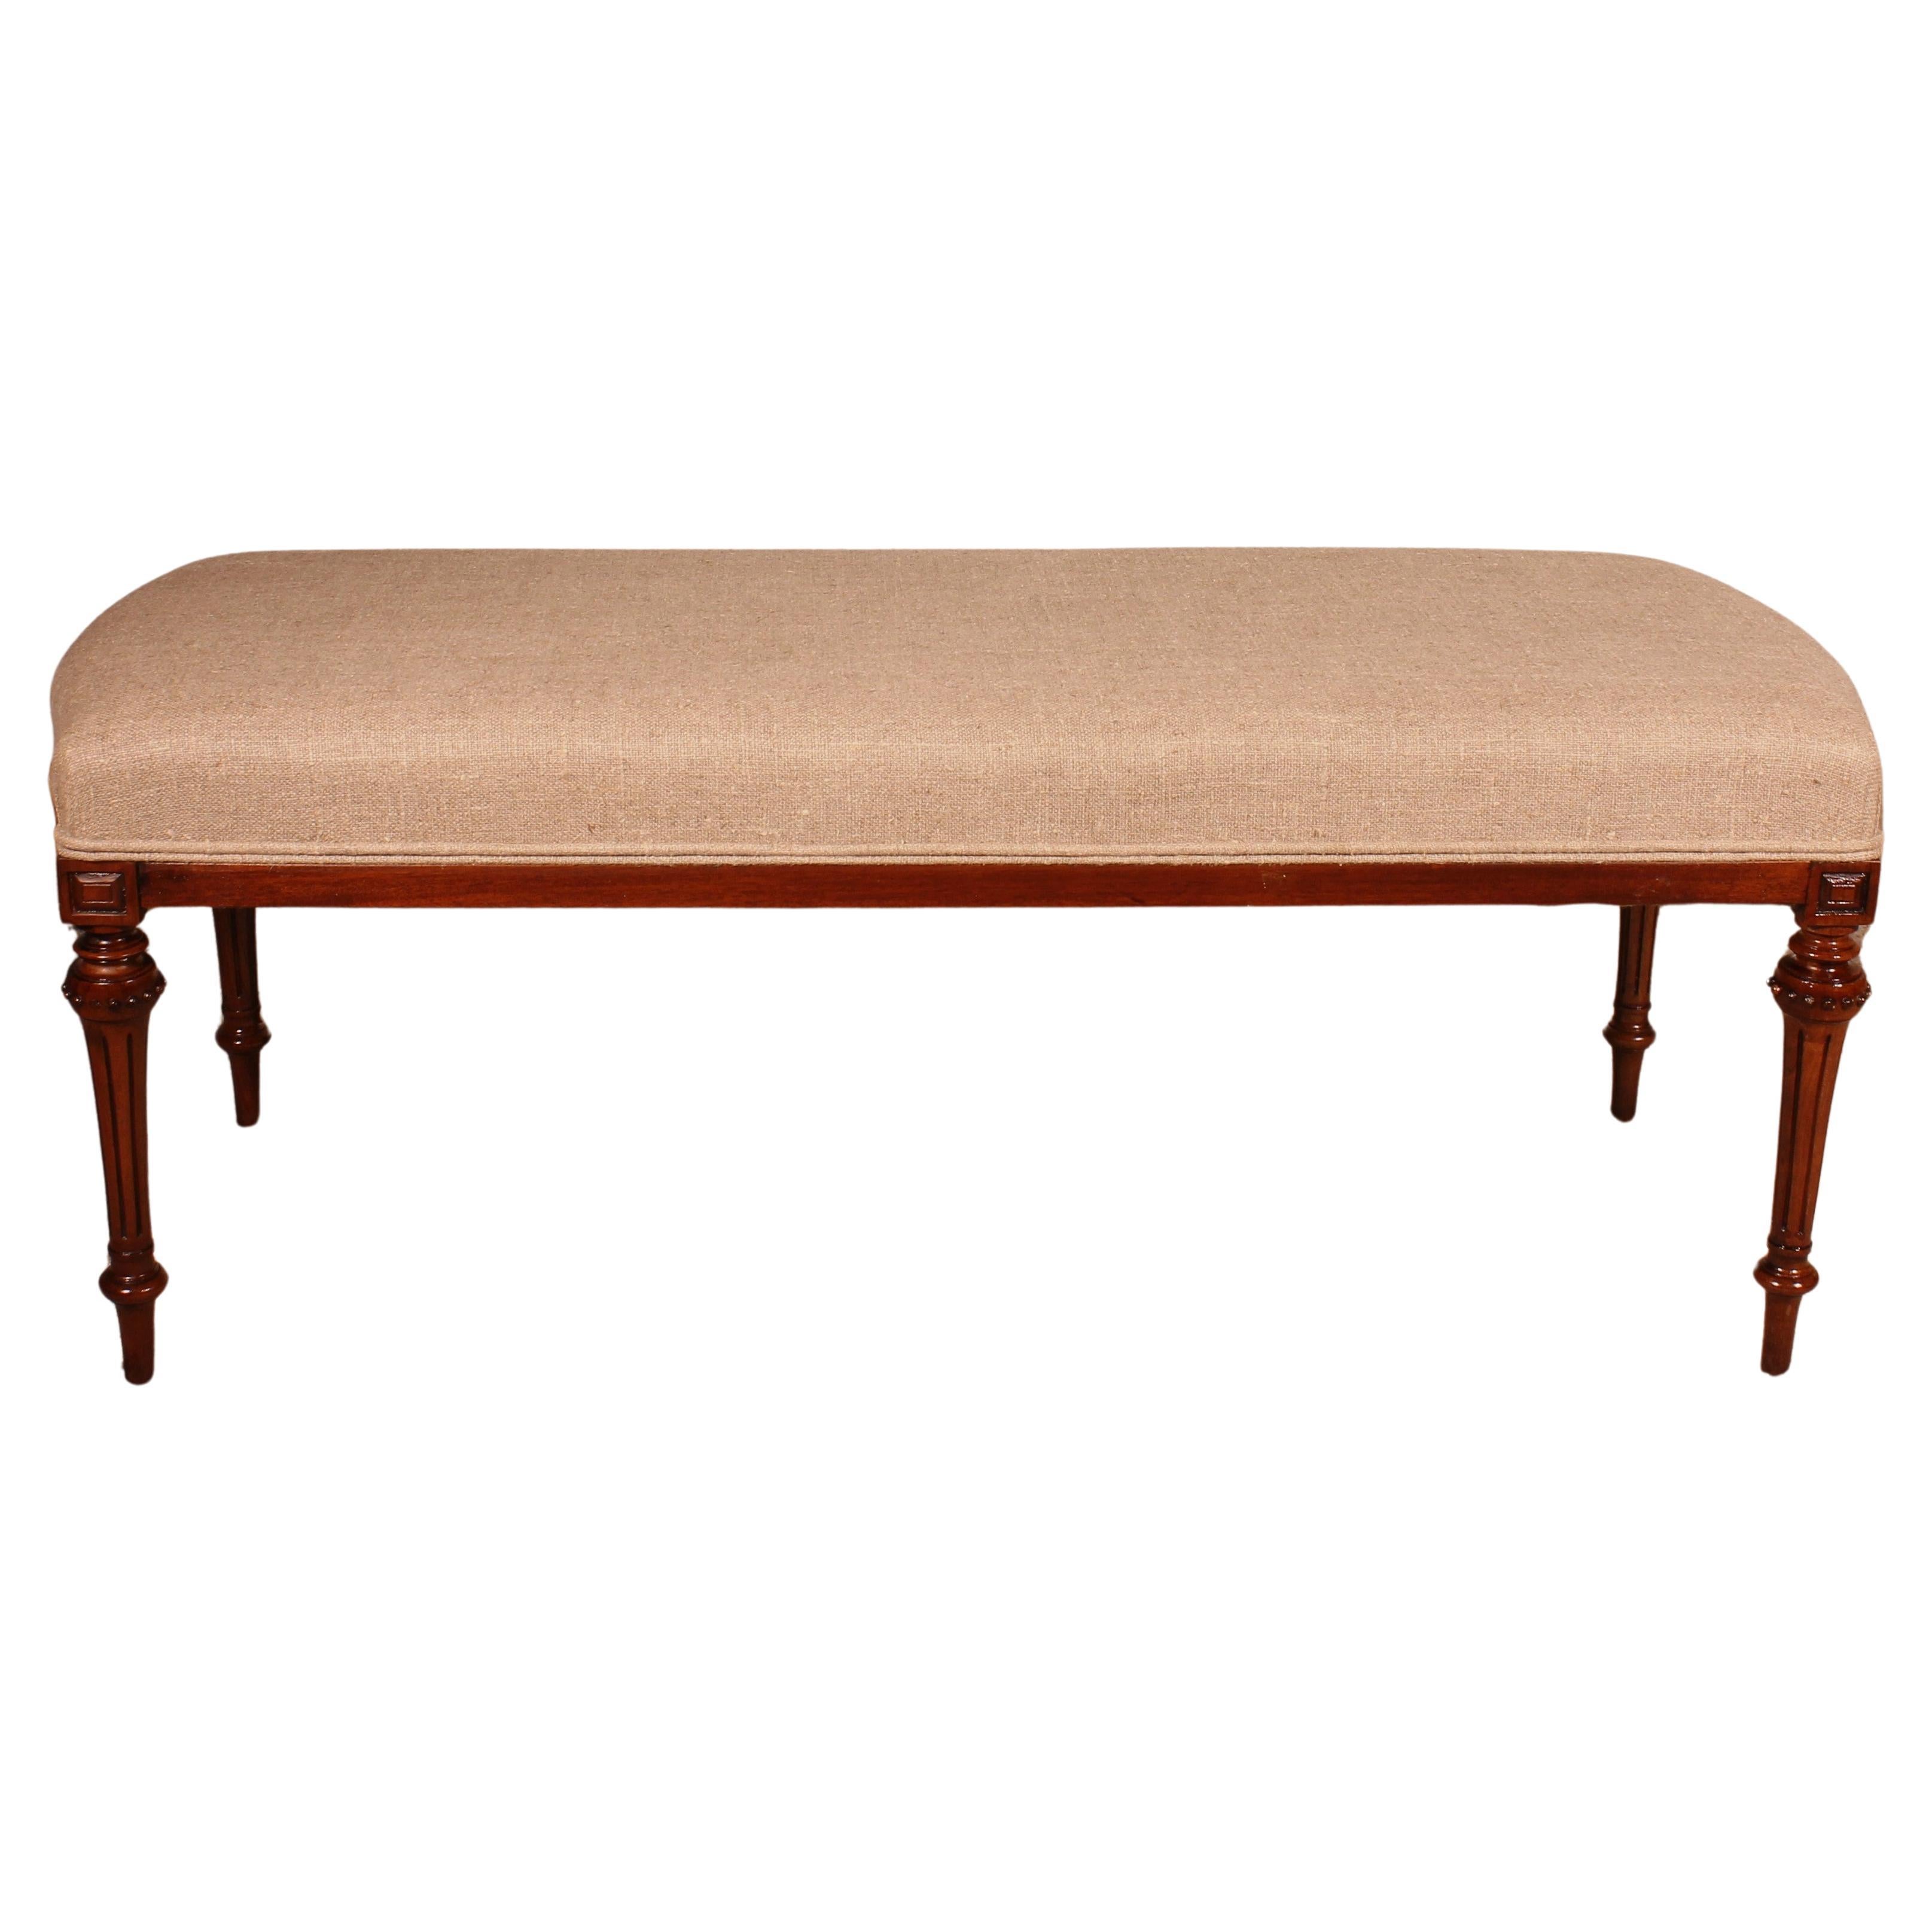 Mahogany Bench From The 19th Century Covered With A Linen Fabric